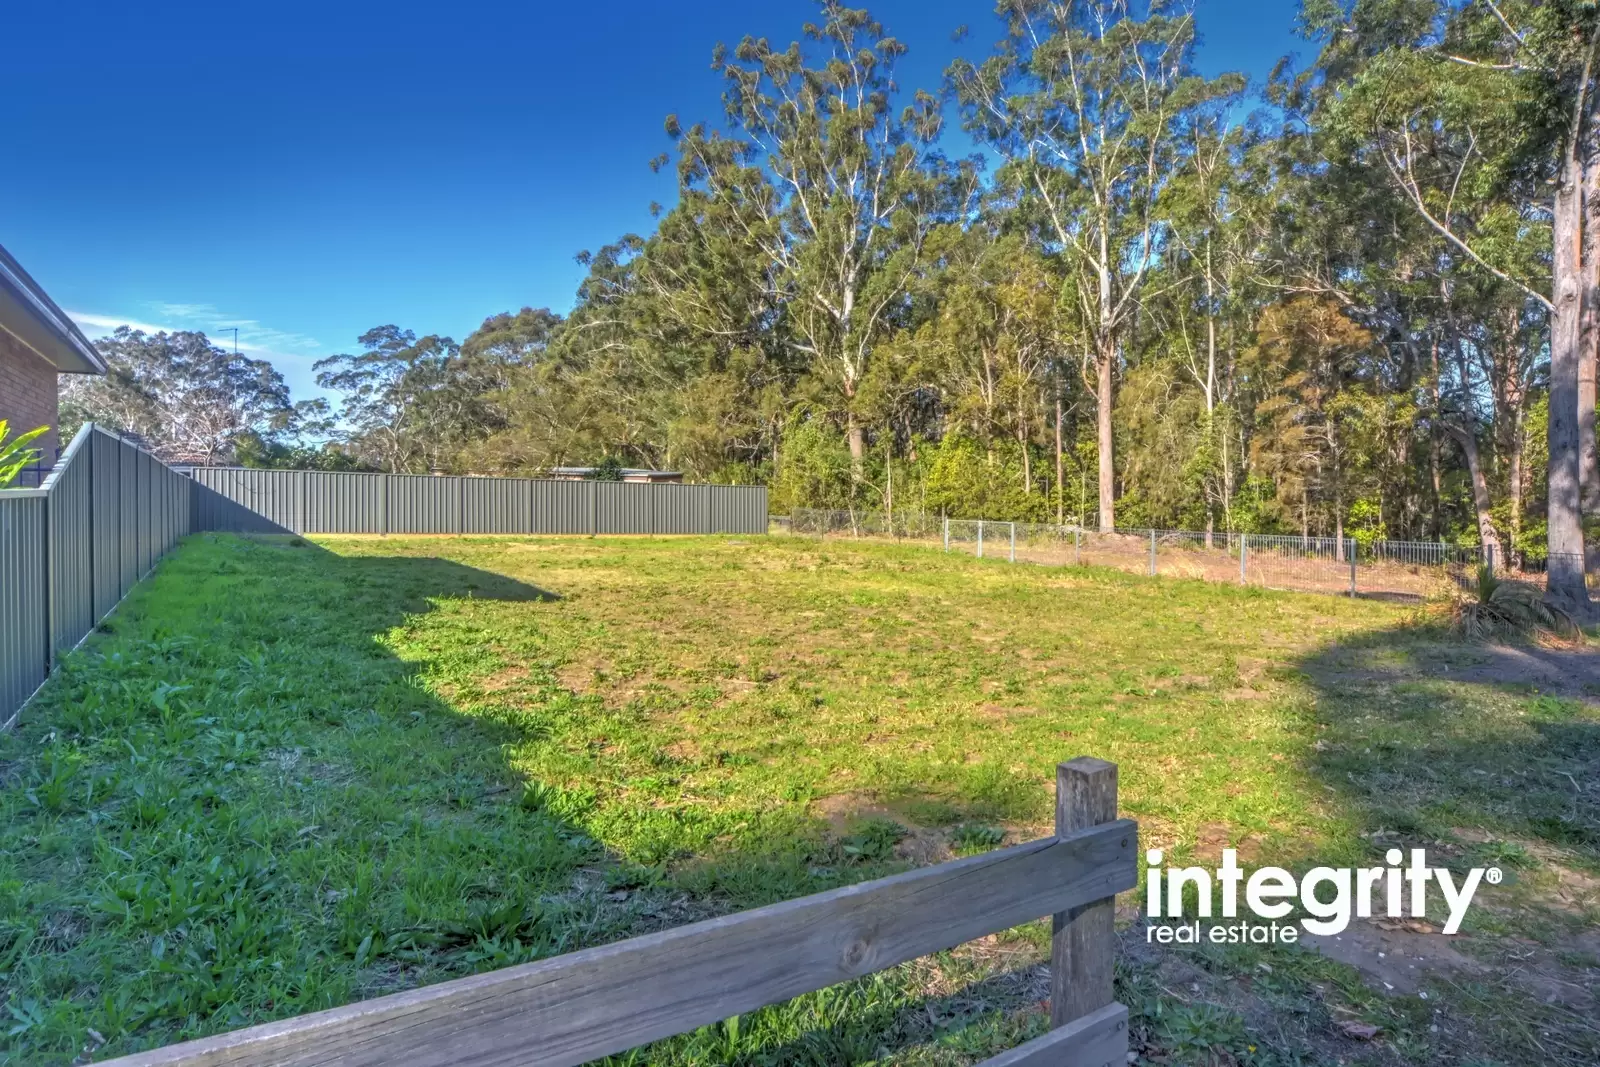 128 Shoalhaven Street, Nowra Sold by Integrity Real Estate - image 1